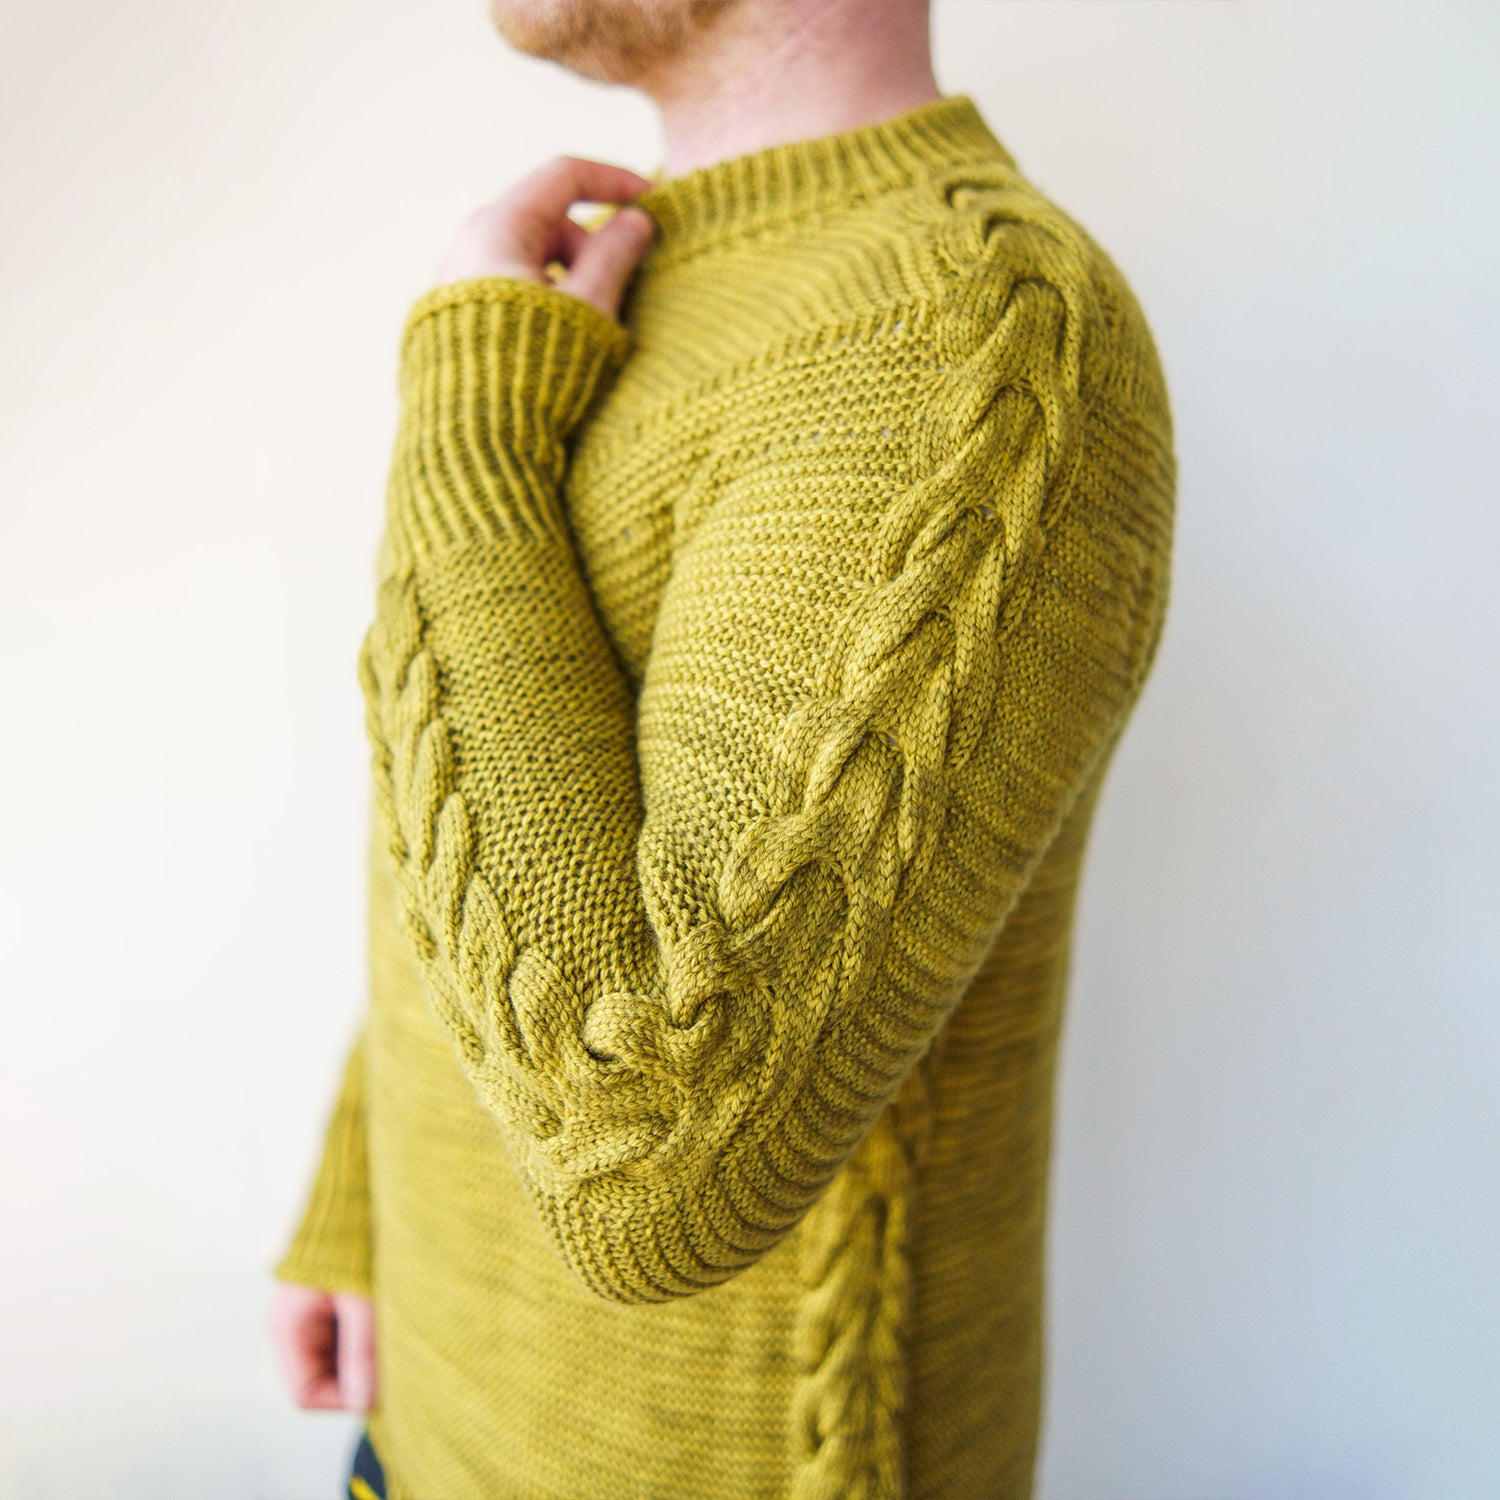 ANTLER SLEEVE SWEATER - APRICOT